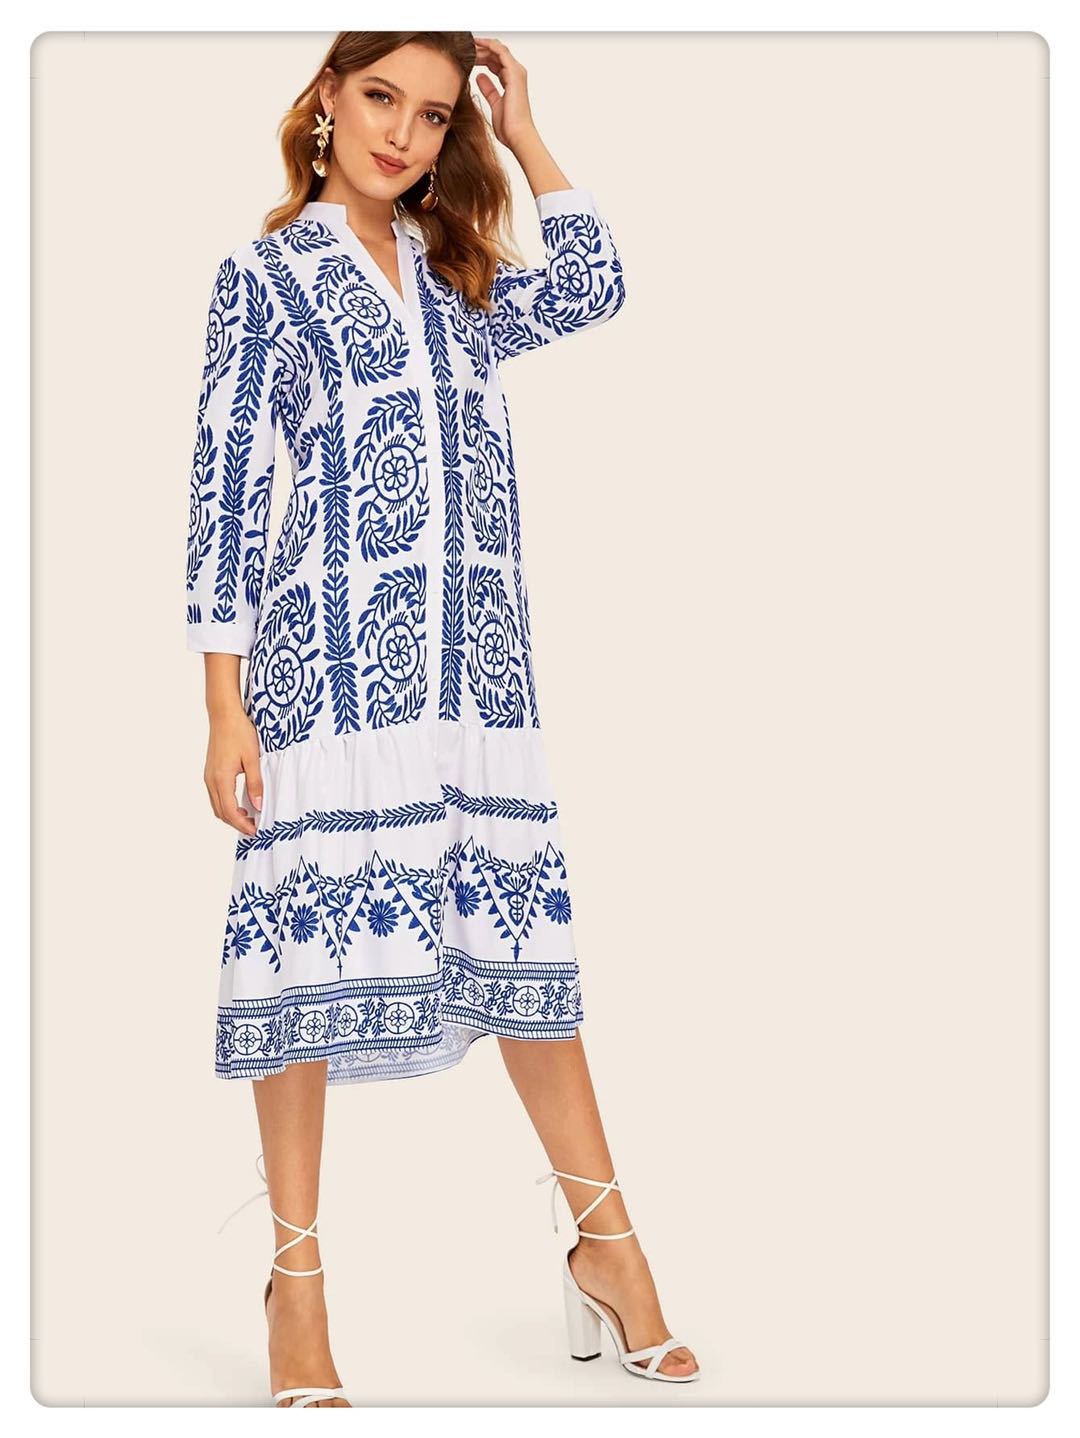 New Women's Blue And White Porcelain Printed Shirt Dress